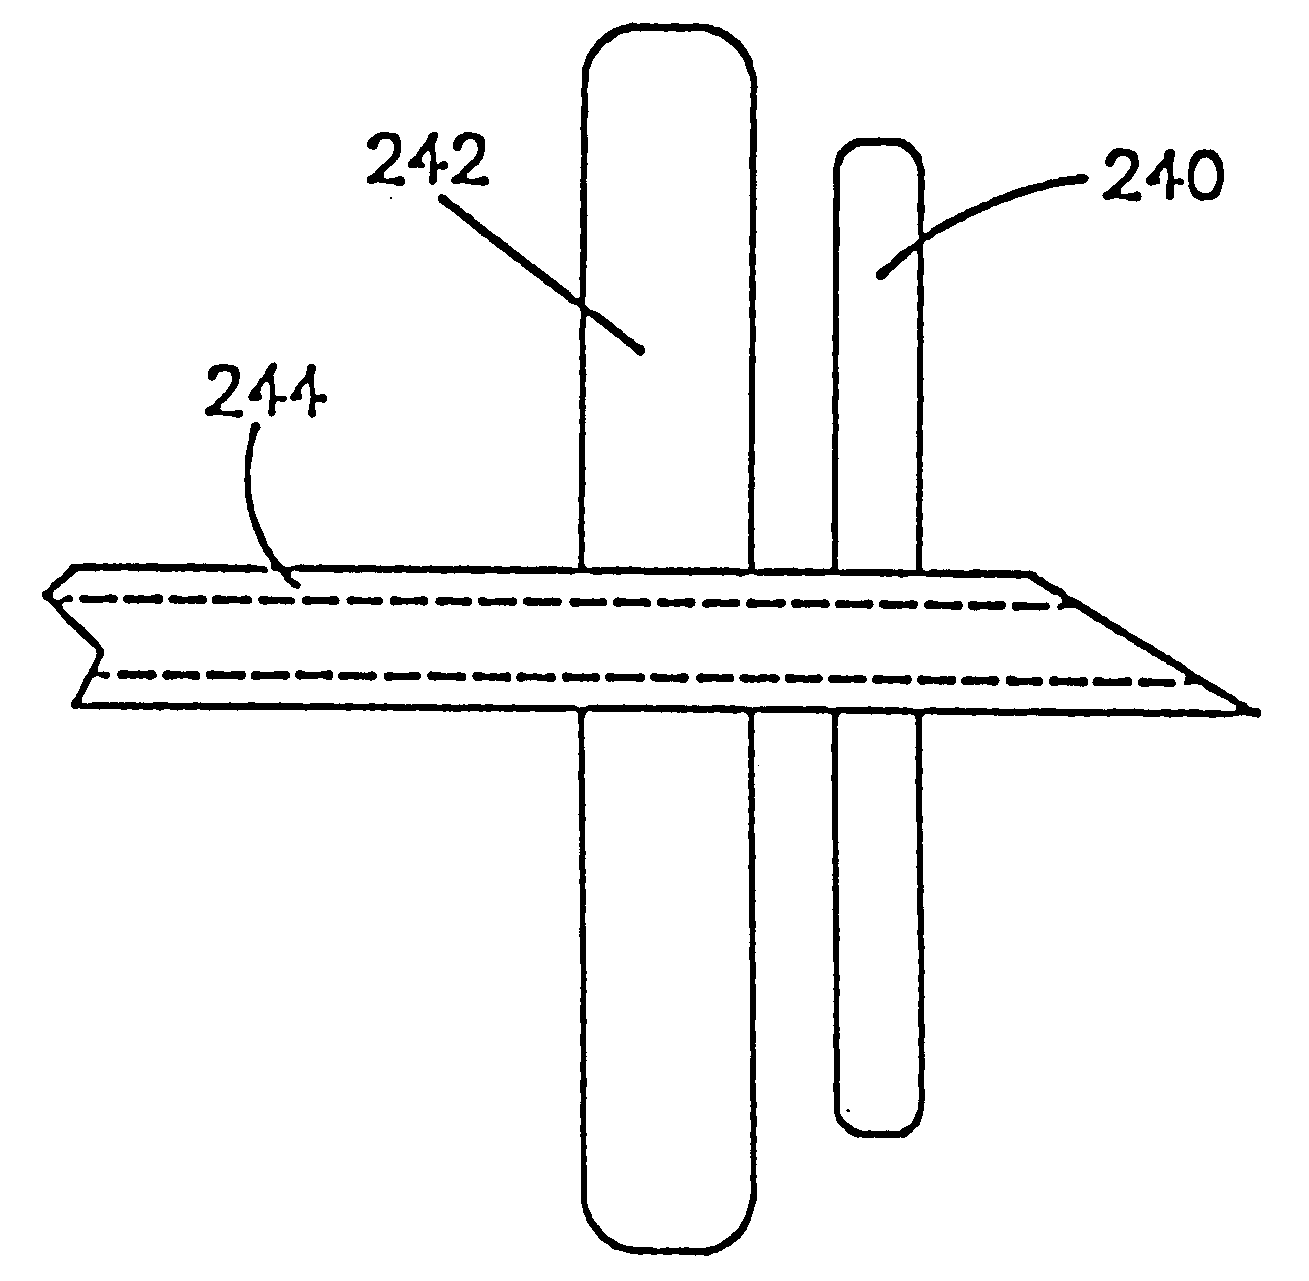 Method of dissecting tissue layers